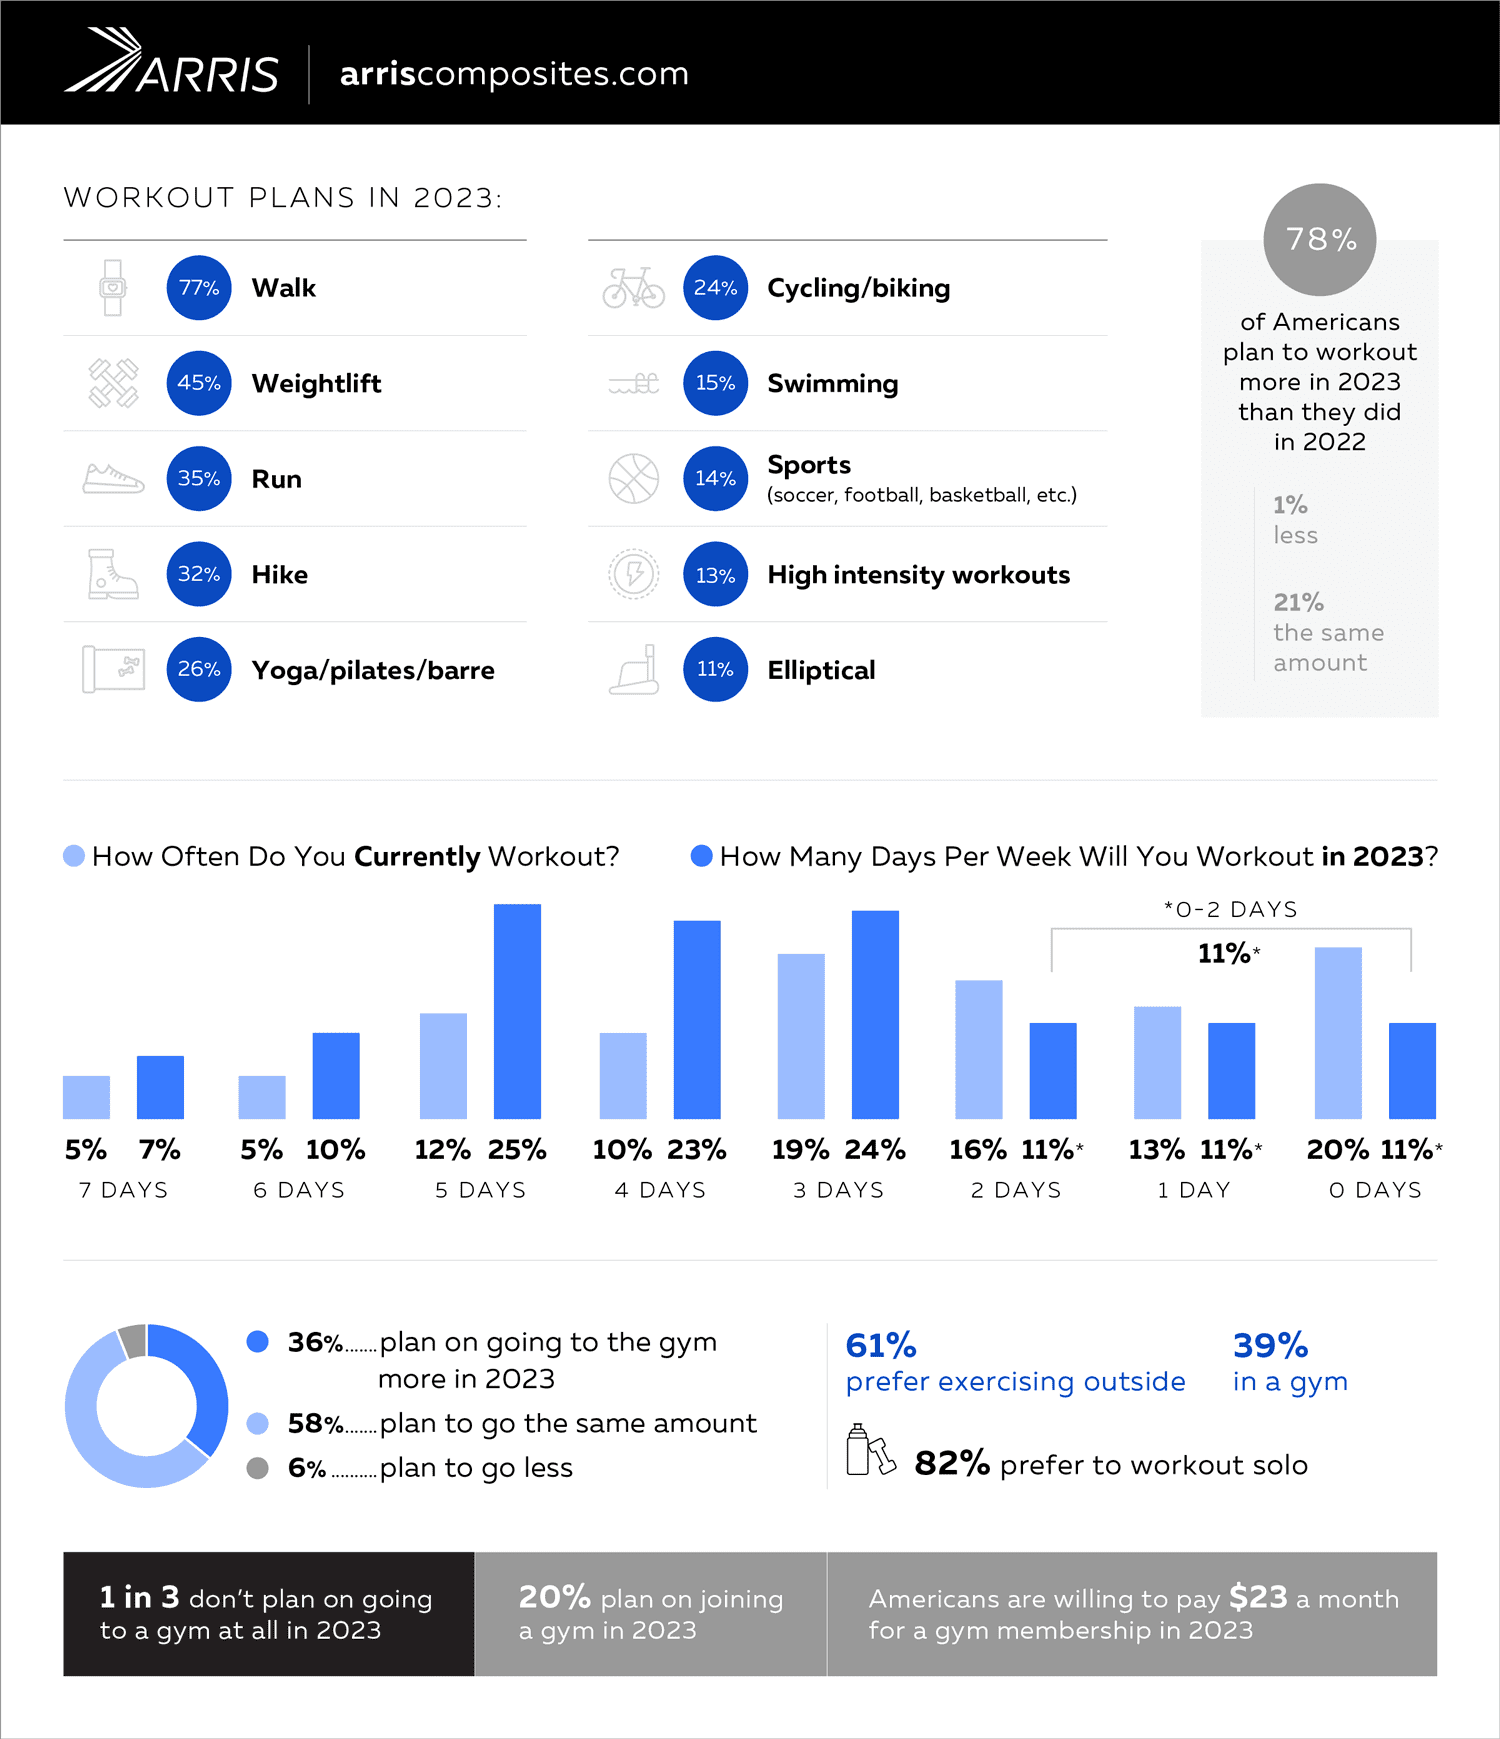 Workout Plans of Americans in 2023 Infographic from arriscomposites.com